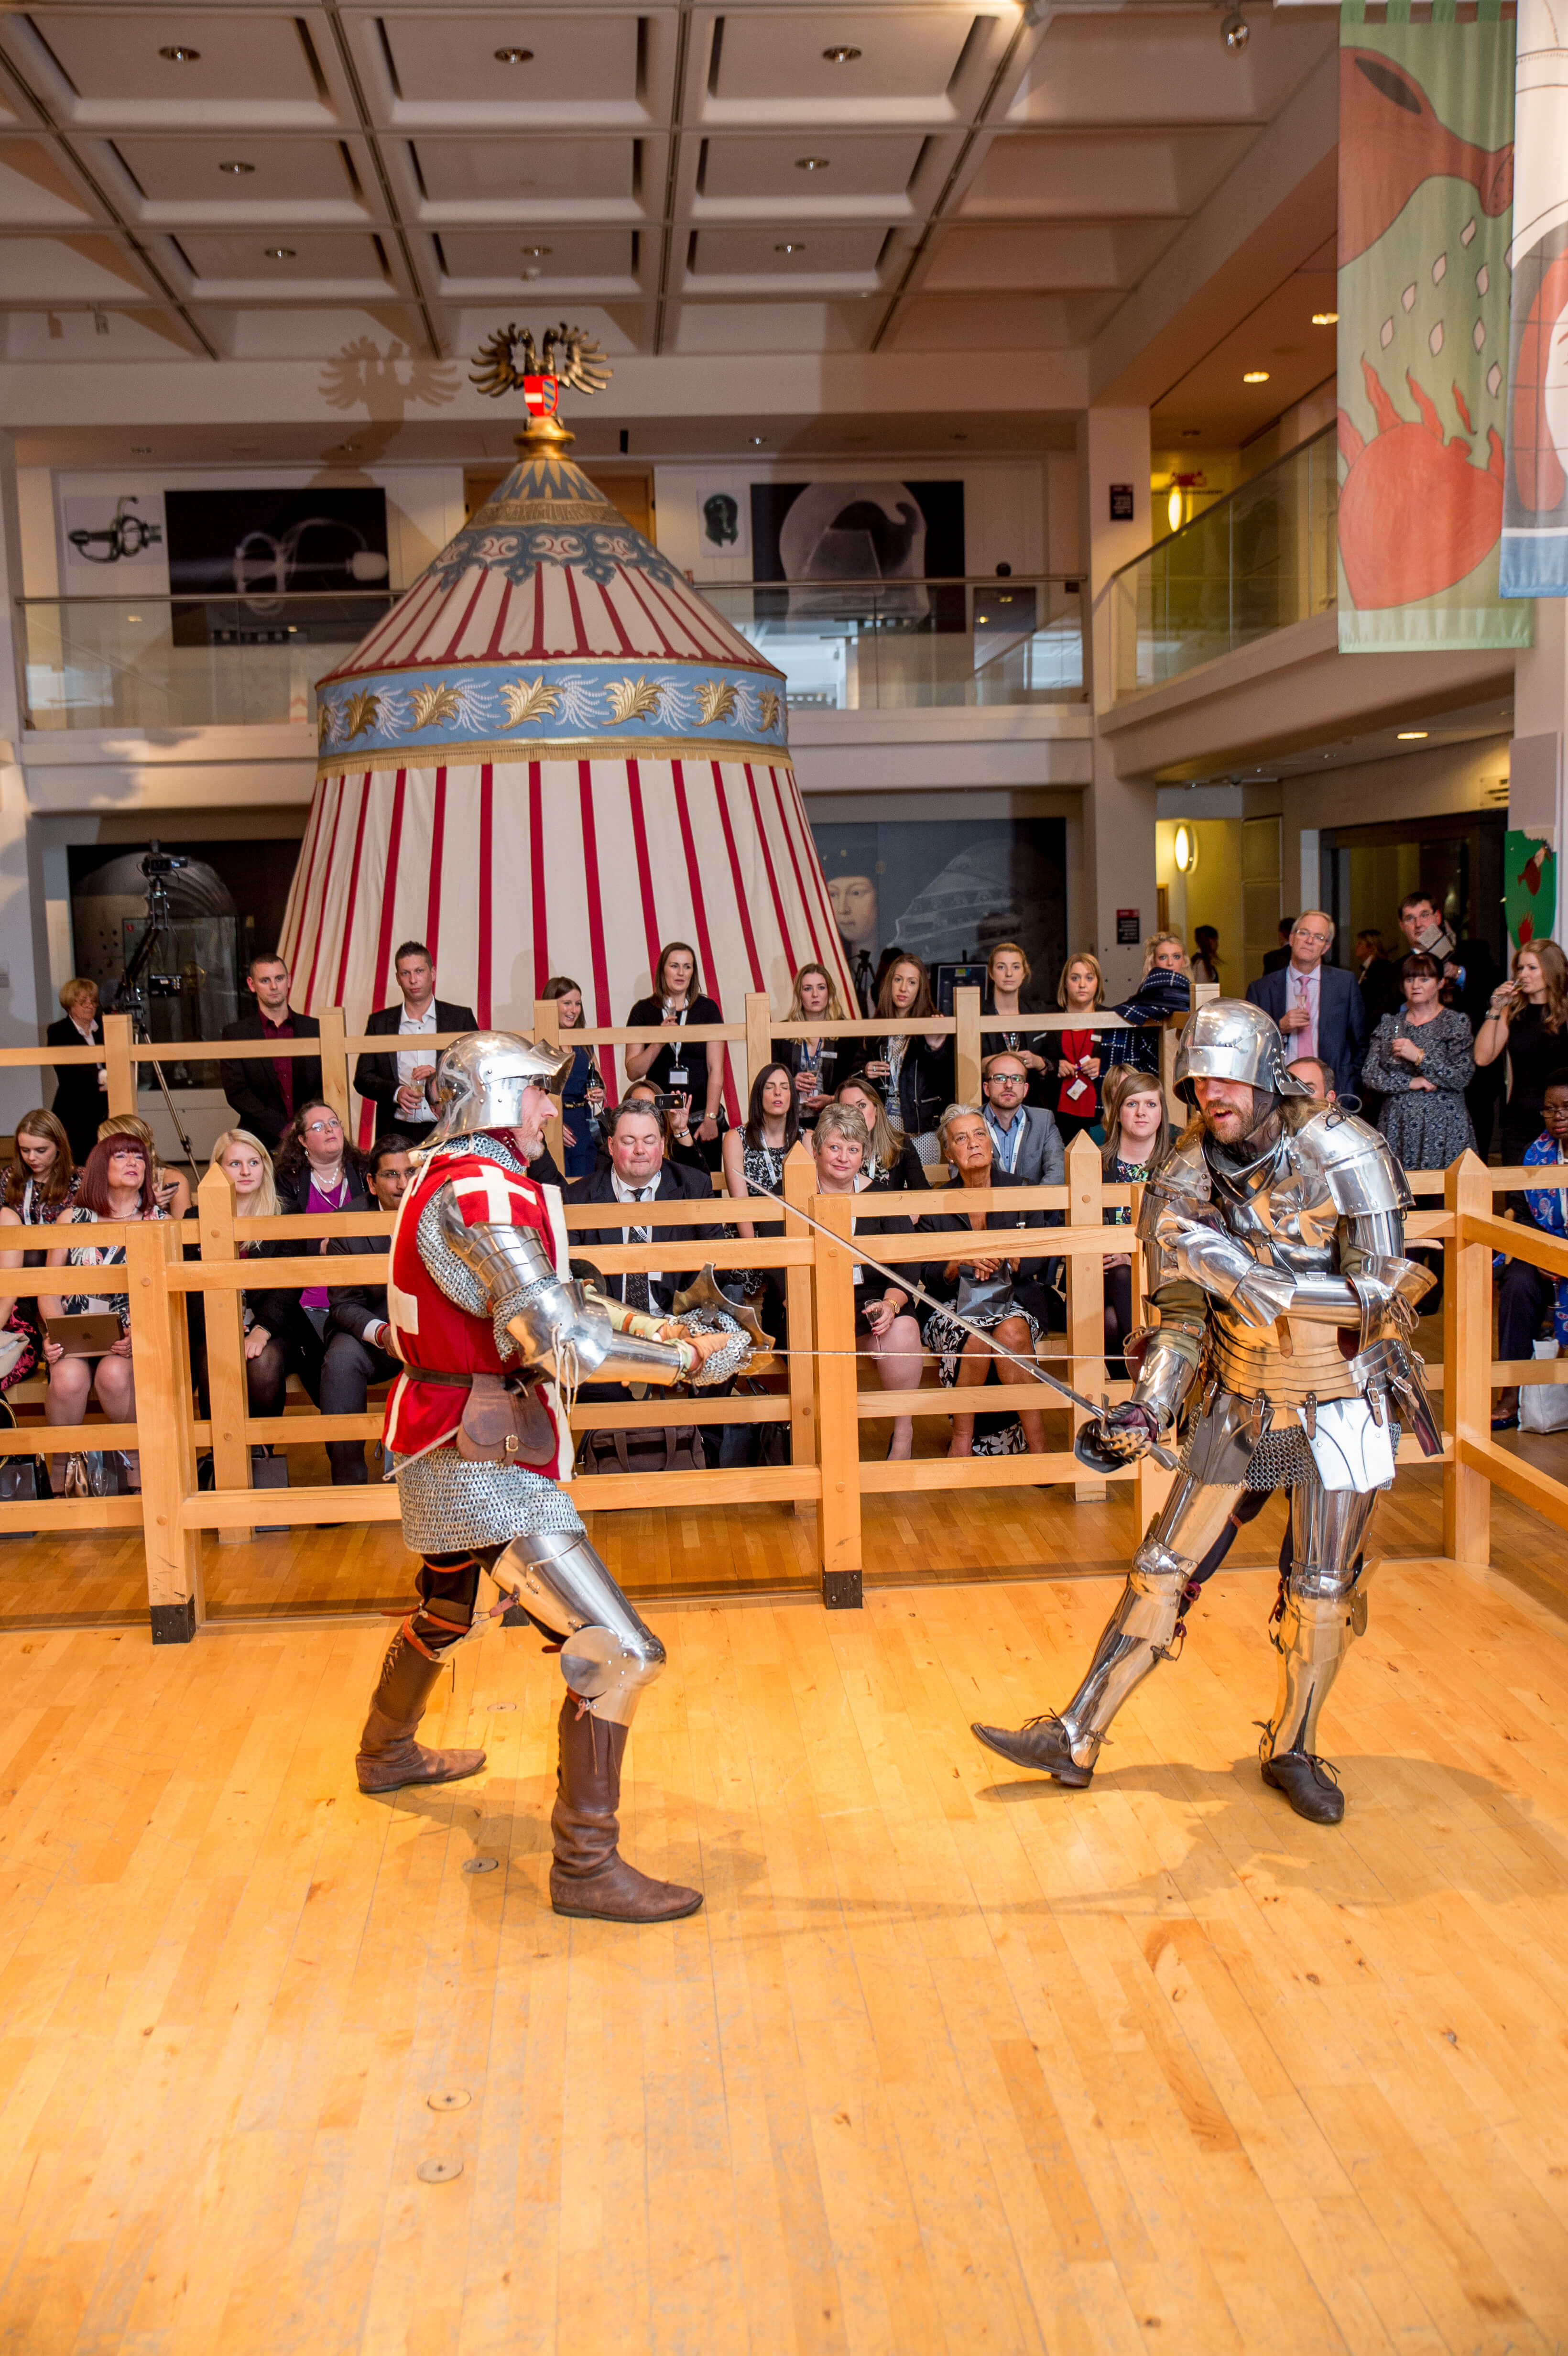 A historic performance taking place at the Tournament Gallery at Royal Armouries